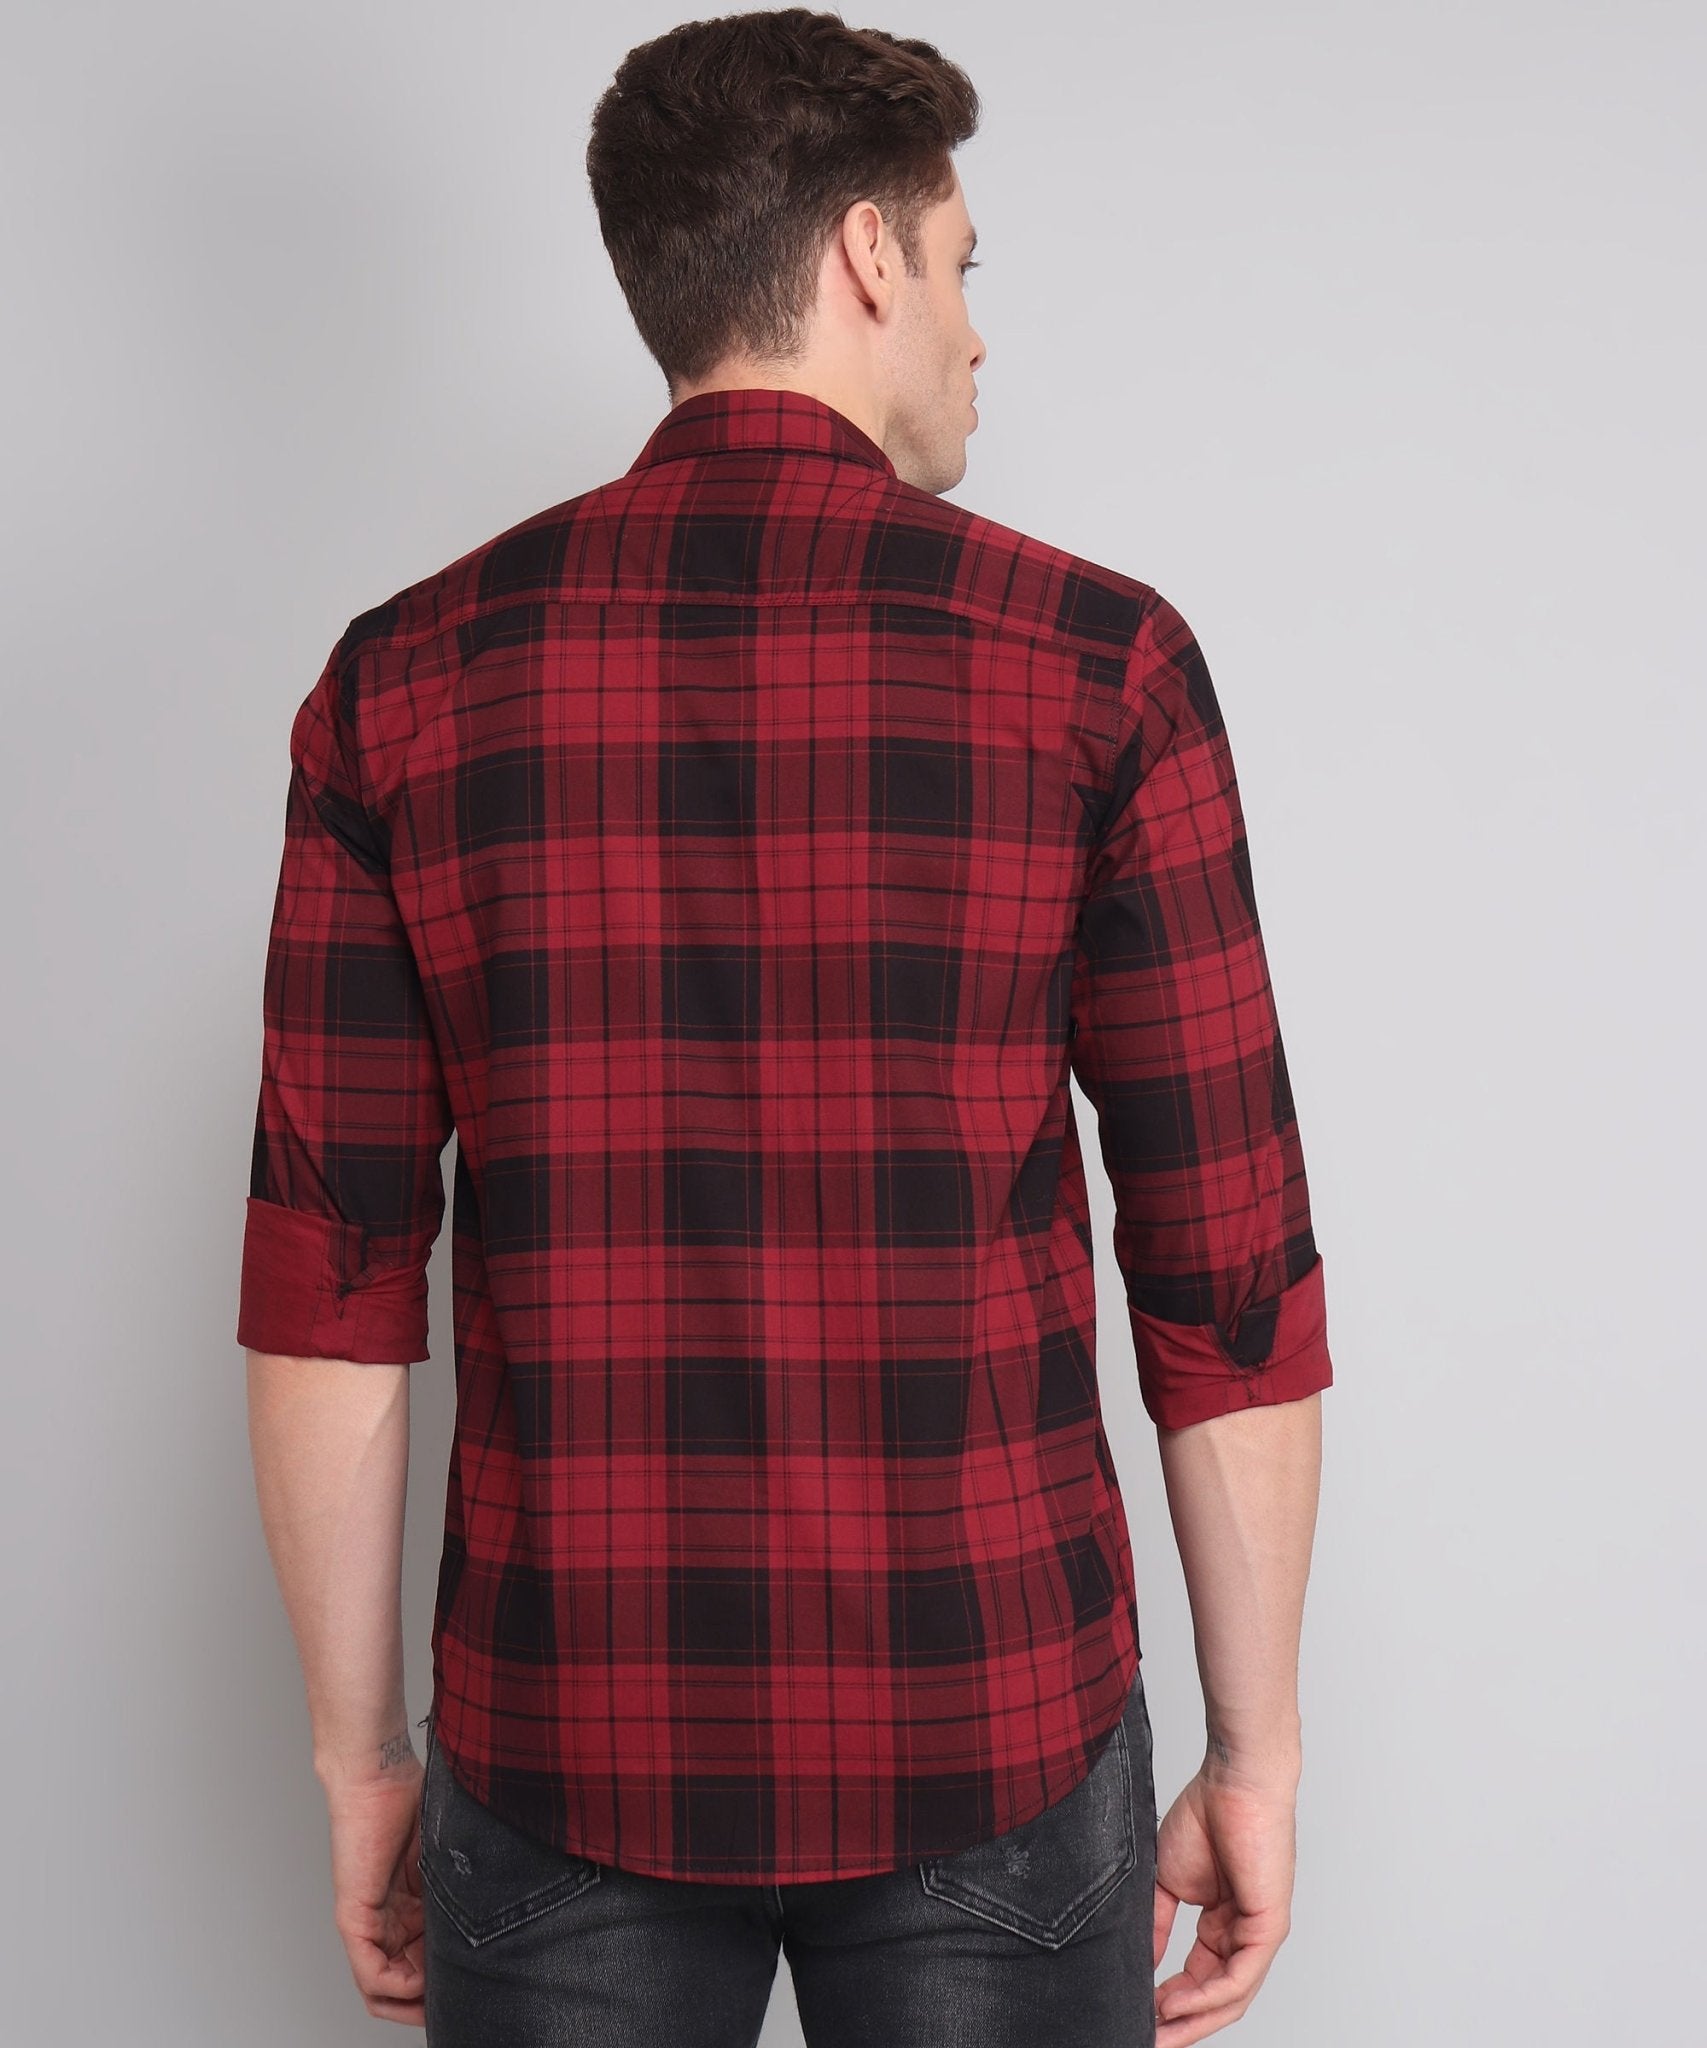 Exclusive TryBuy Premium Black Red Checks Shirt for Men - TryBuy® USA🇺🇸